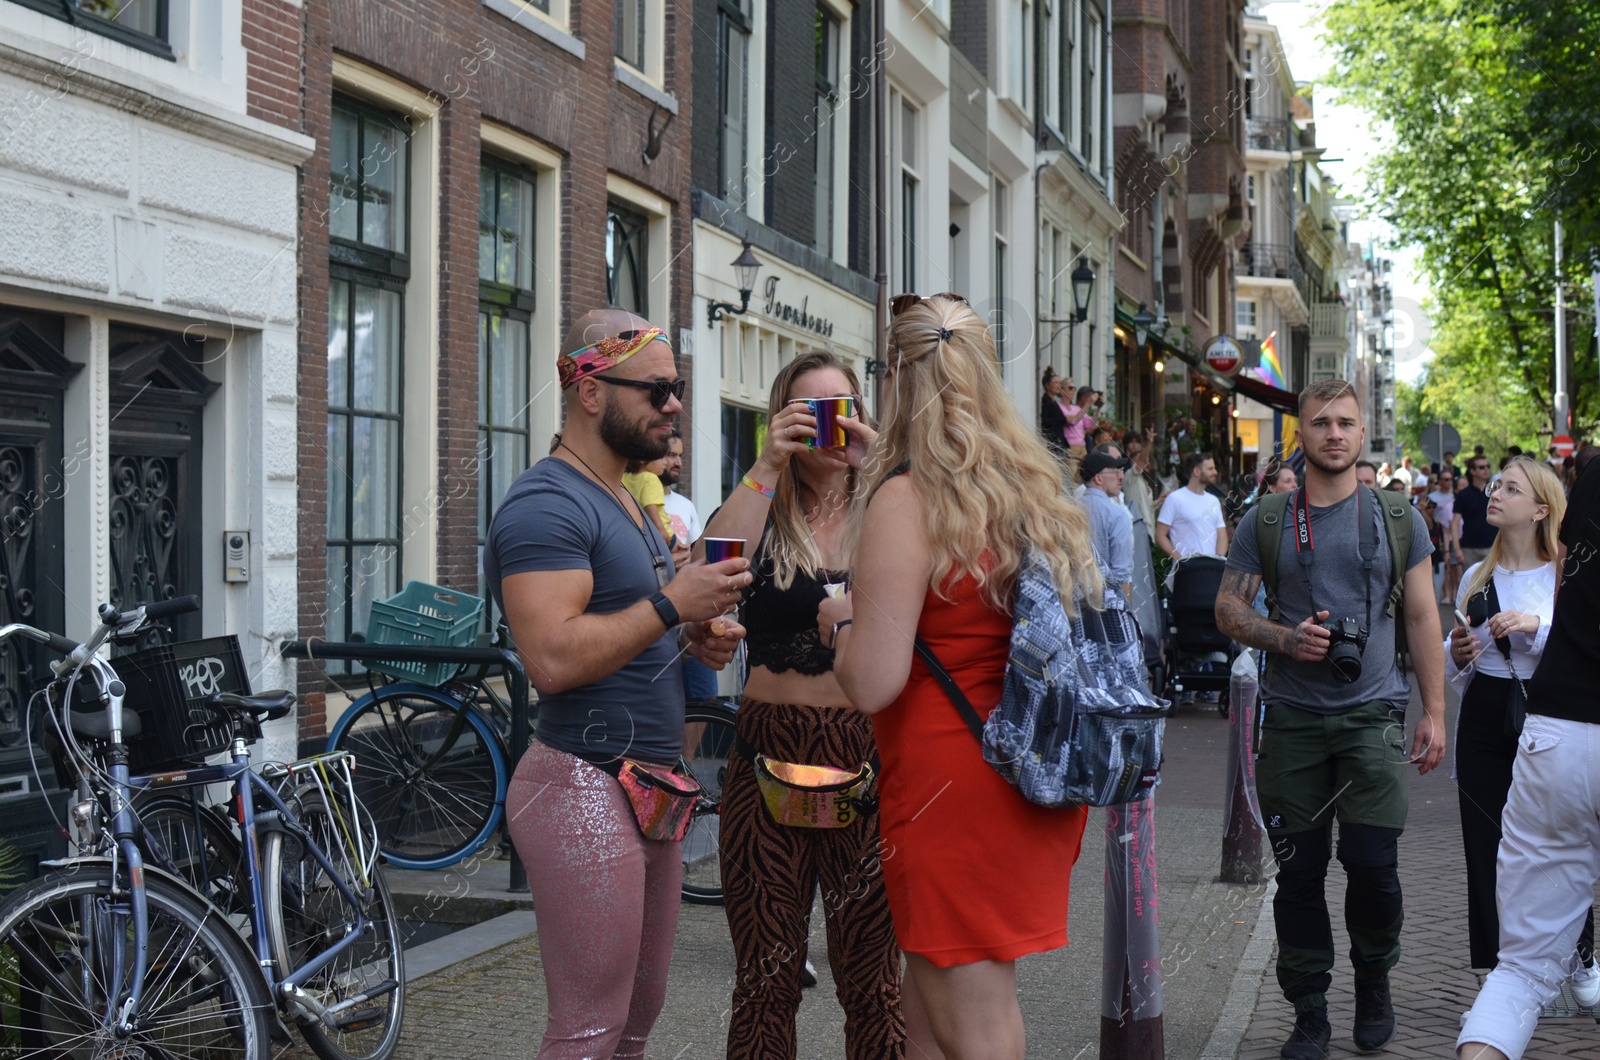 Photo of AMSTERDAM, NETHERLANDS - AUGUST 06, 2022: People in bright clothes at LGBT pride parade on sunny day